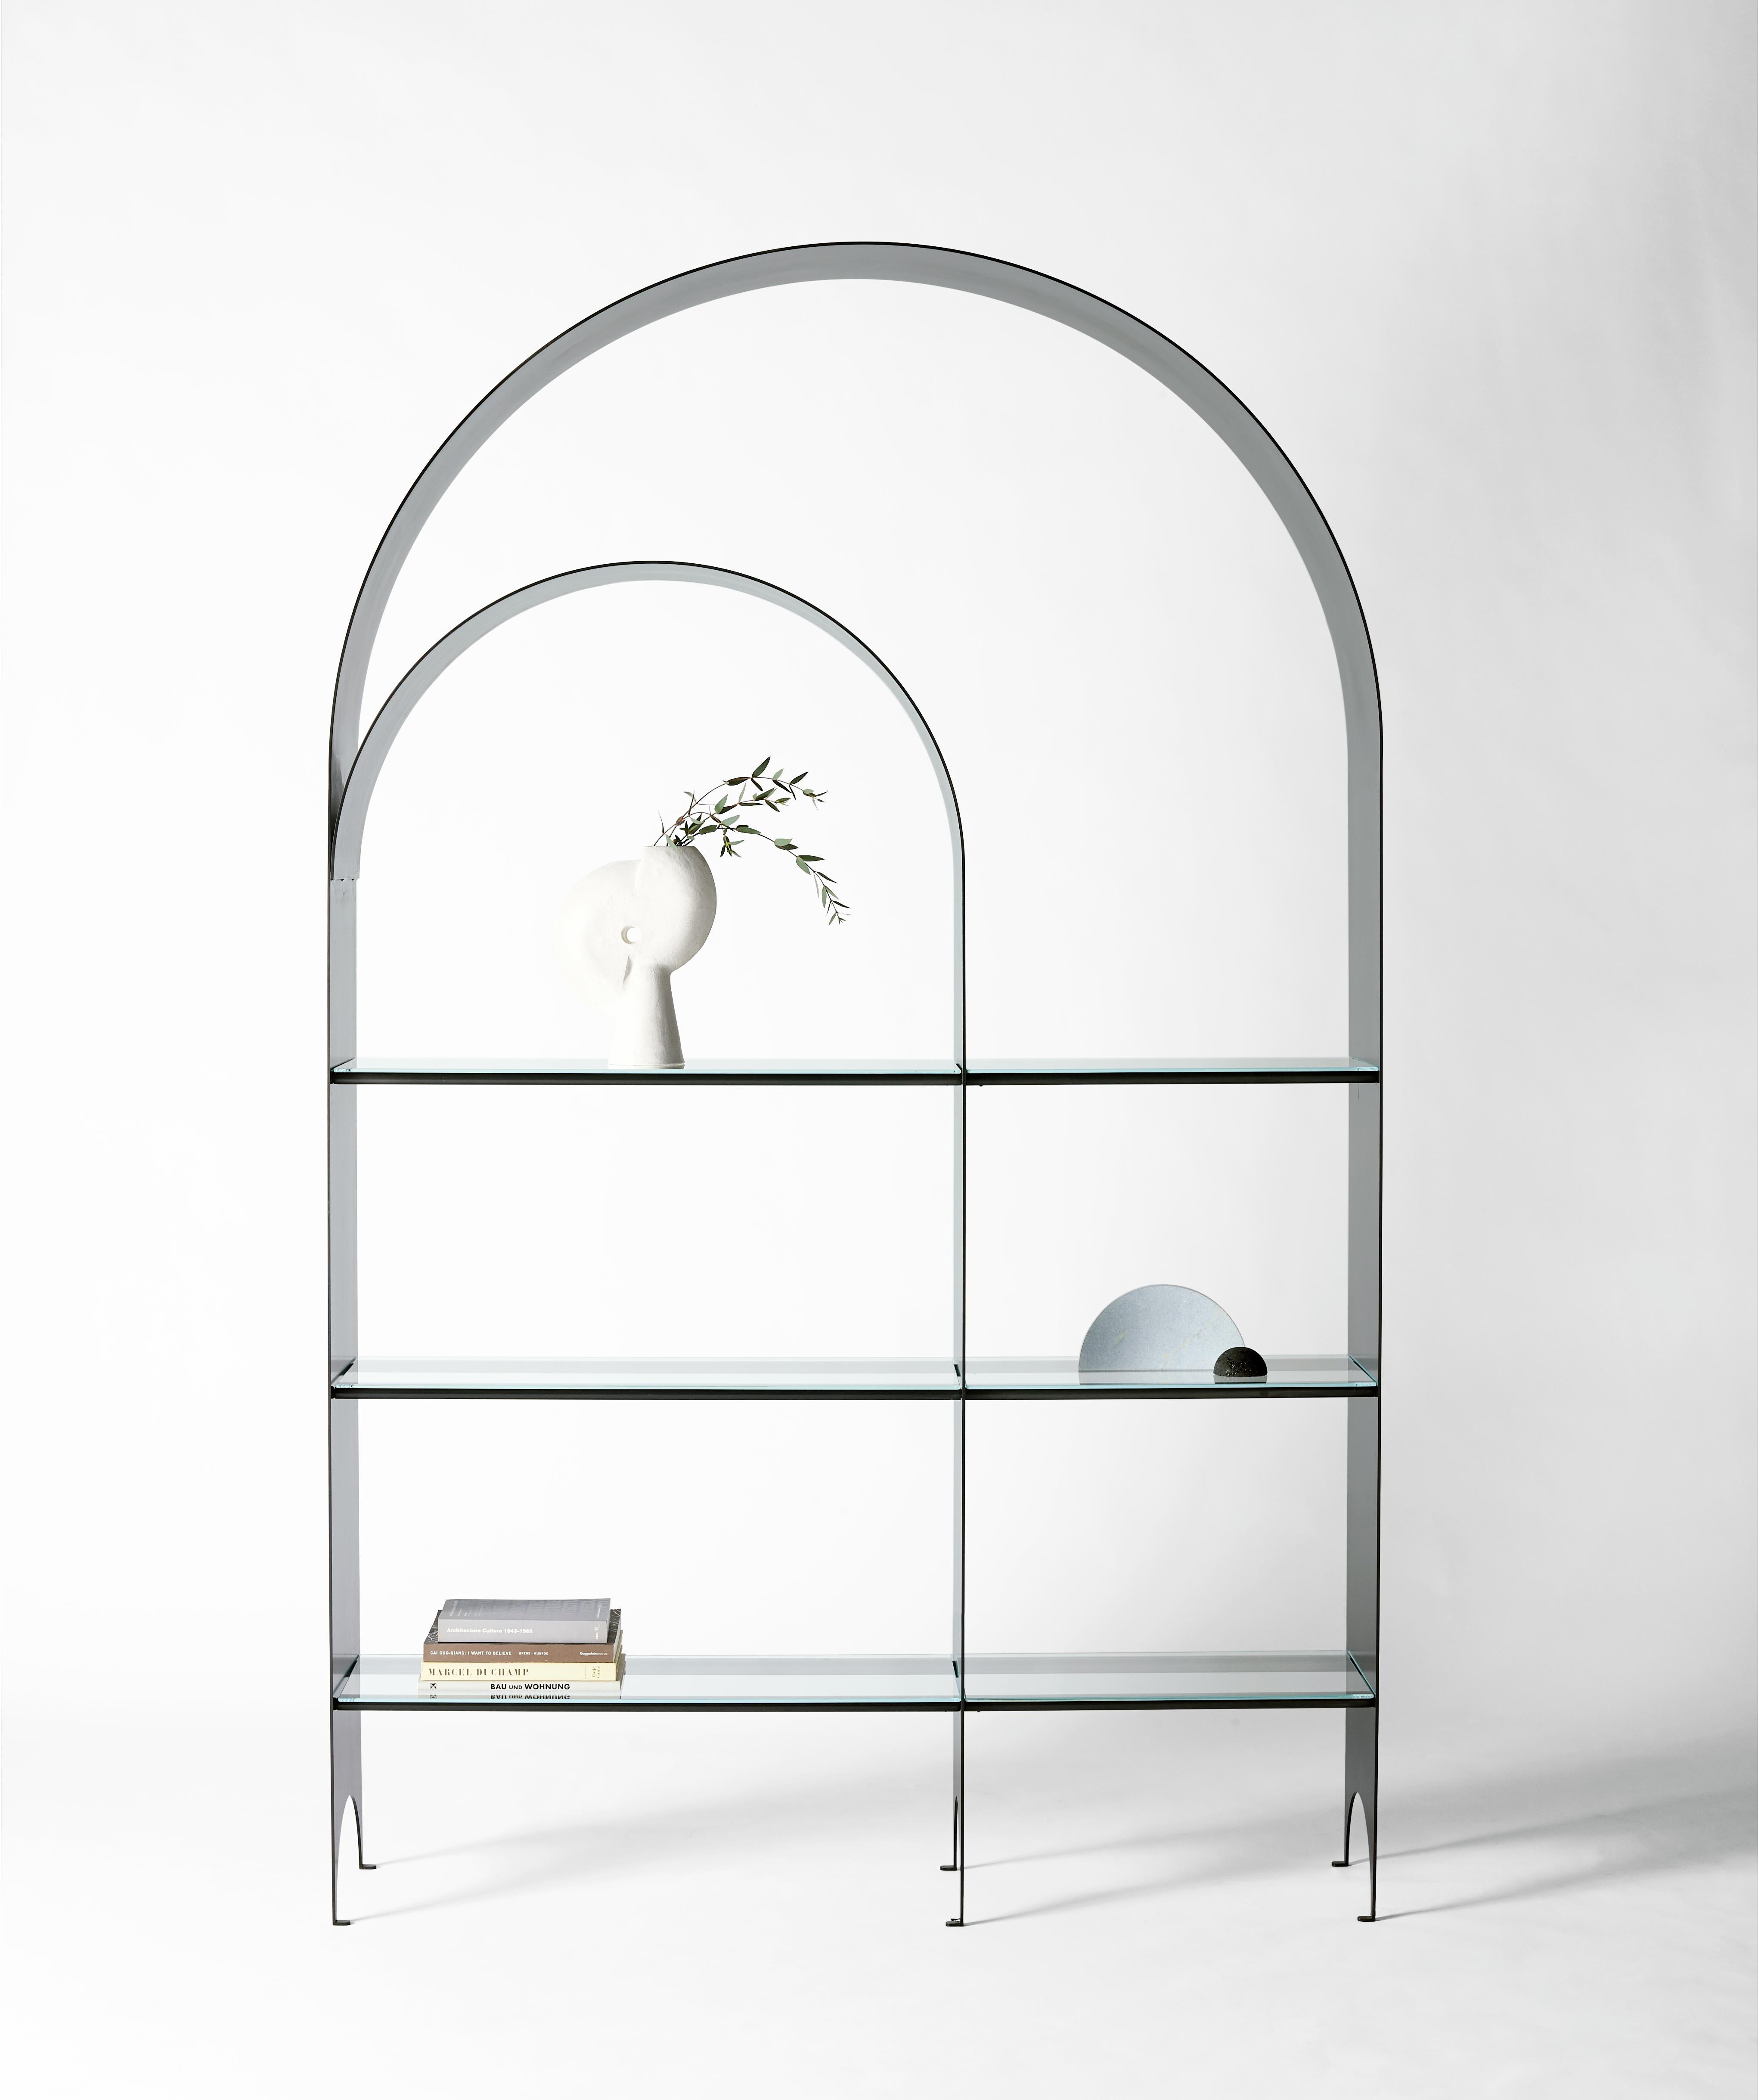 The thin shelf is the newest addition to the thin series, a collection exploring the potential of rigid yet pliant steel plates. The blackened steel arch of the Thin Shelf delicately extends upward from the floor tracing a double line along the